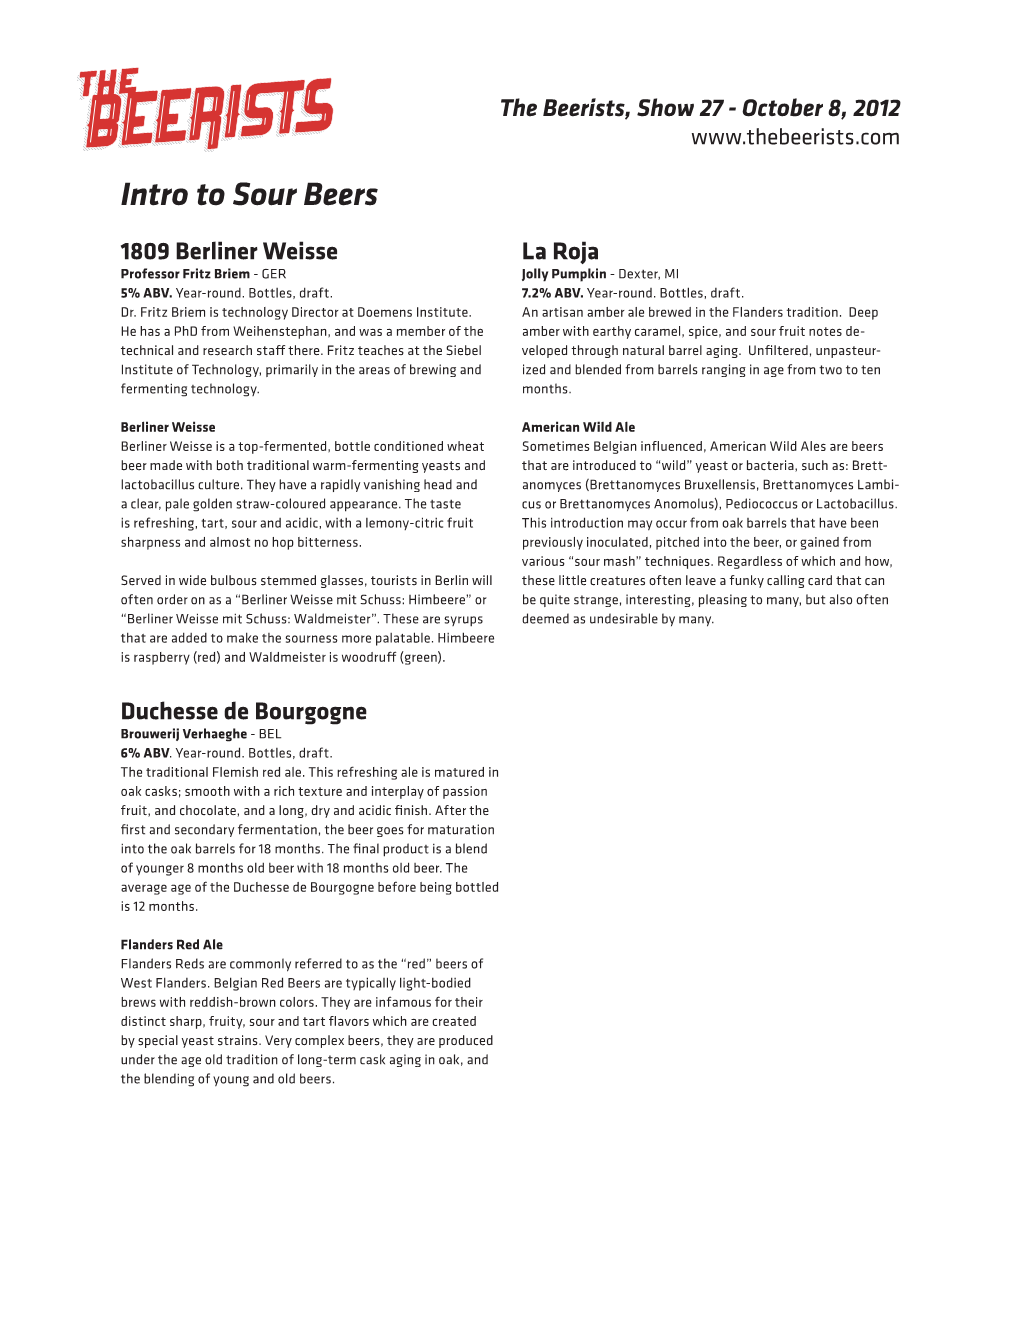 Intro to Sour Beers